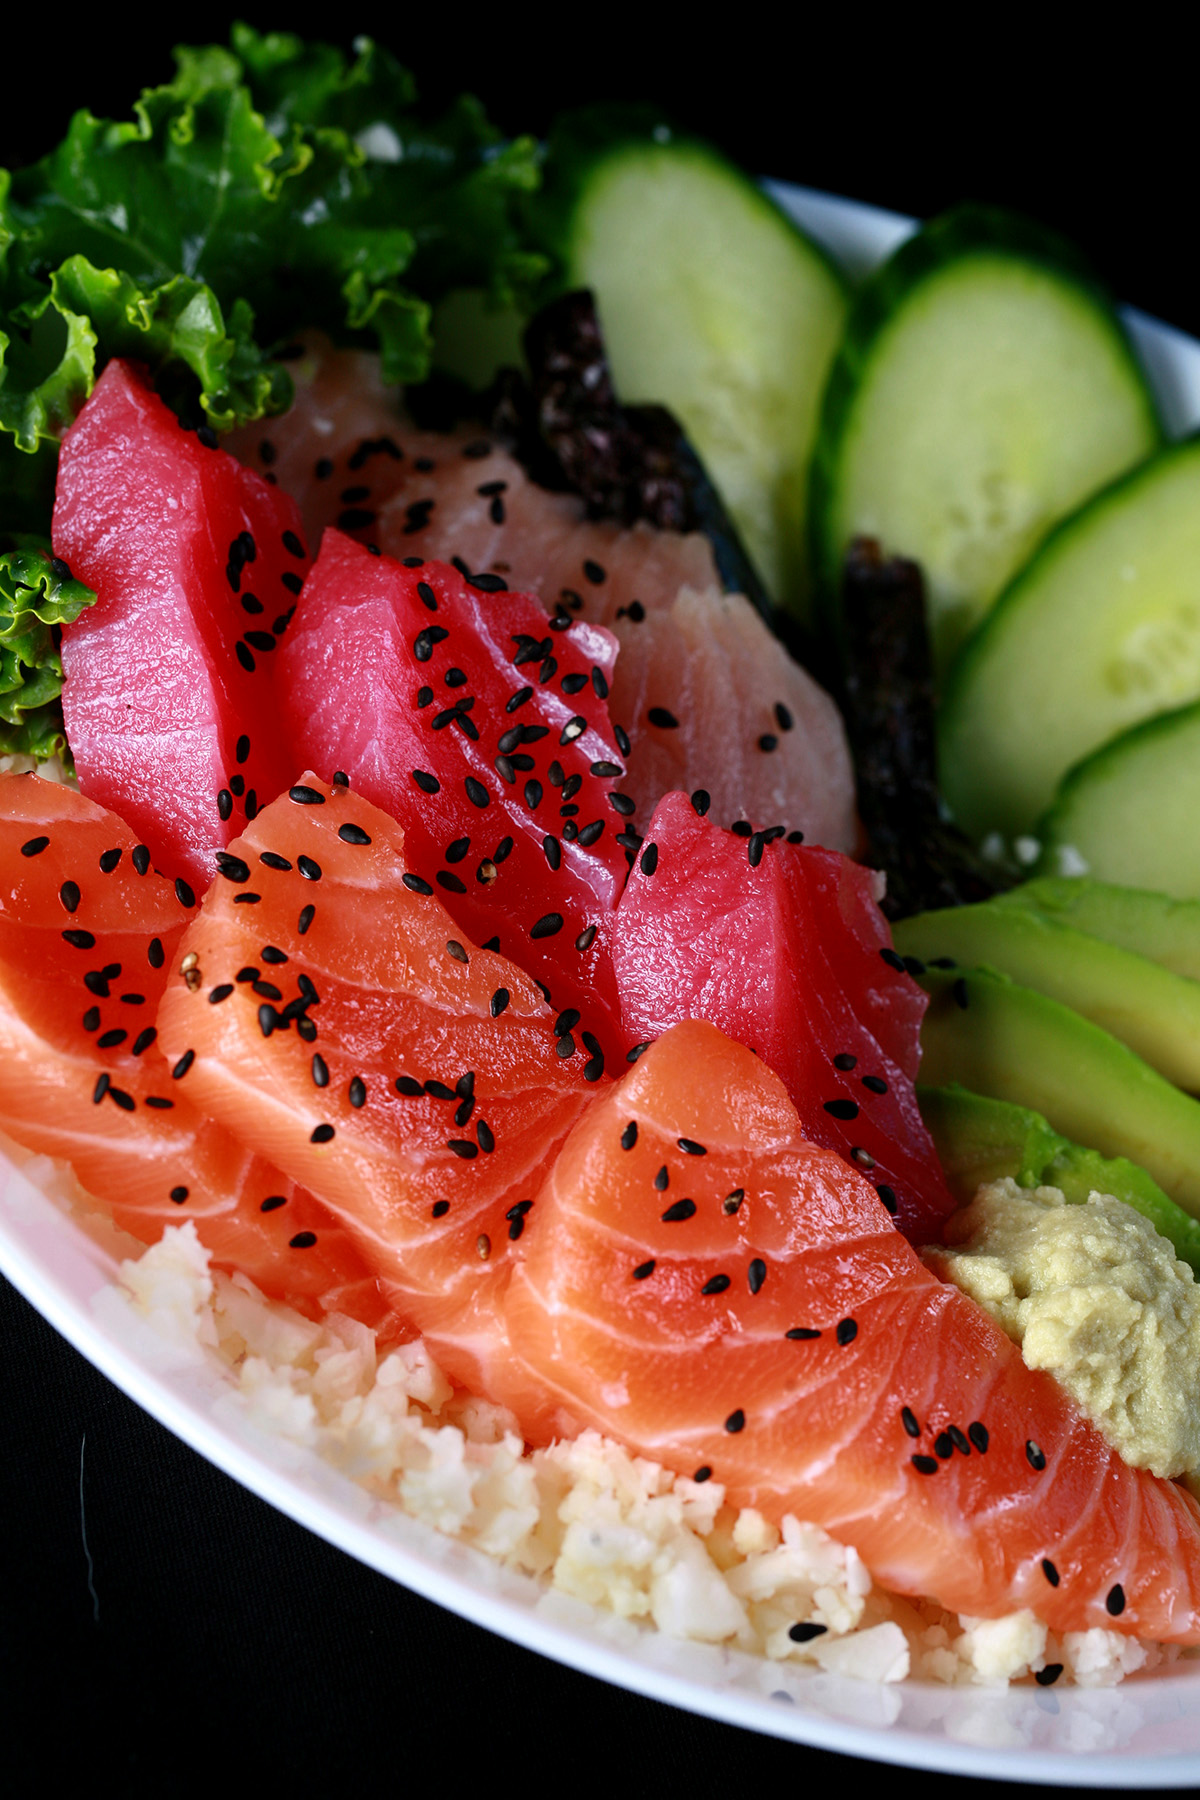 A keto chirashi bowl - A shallow bowl with various cuts of fish - salmon, tuna, and snapper - as well as some veggies. It is all arranged on top of riced cauliflower.